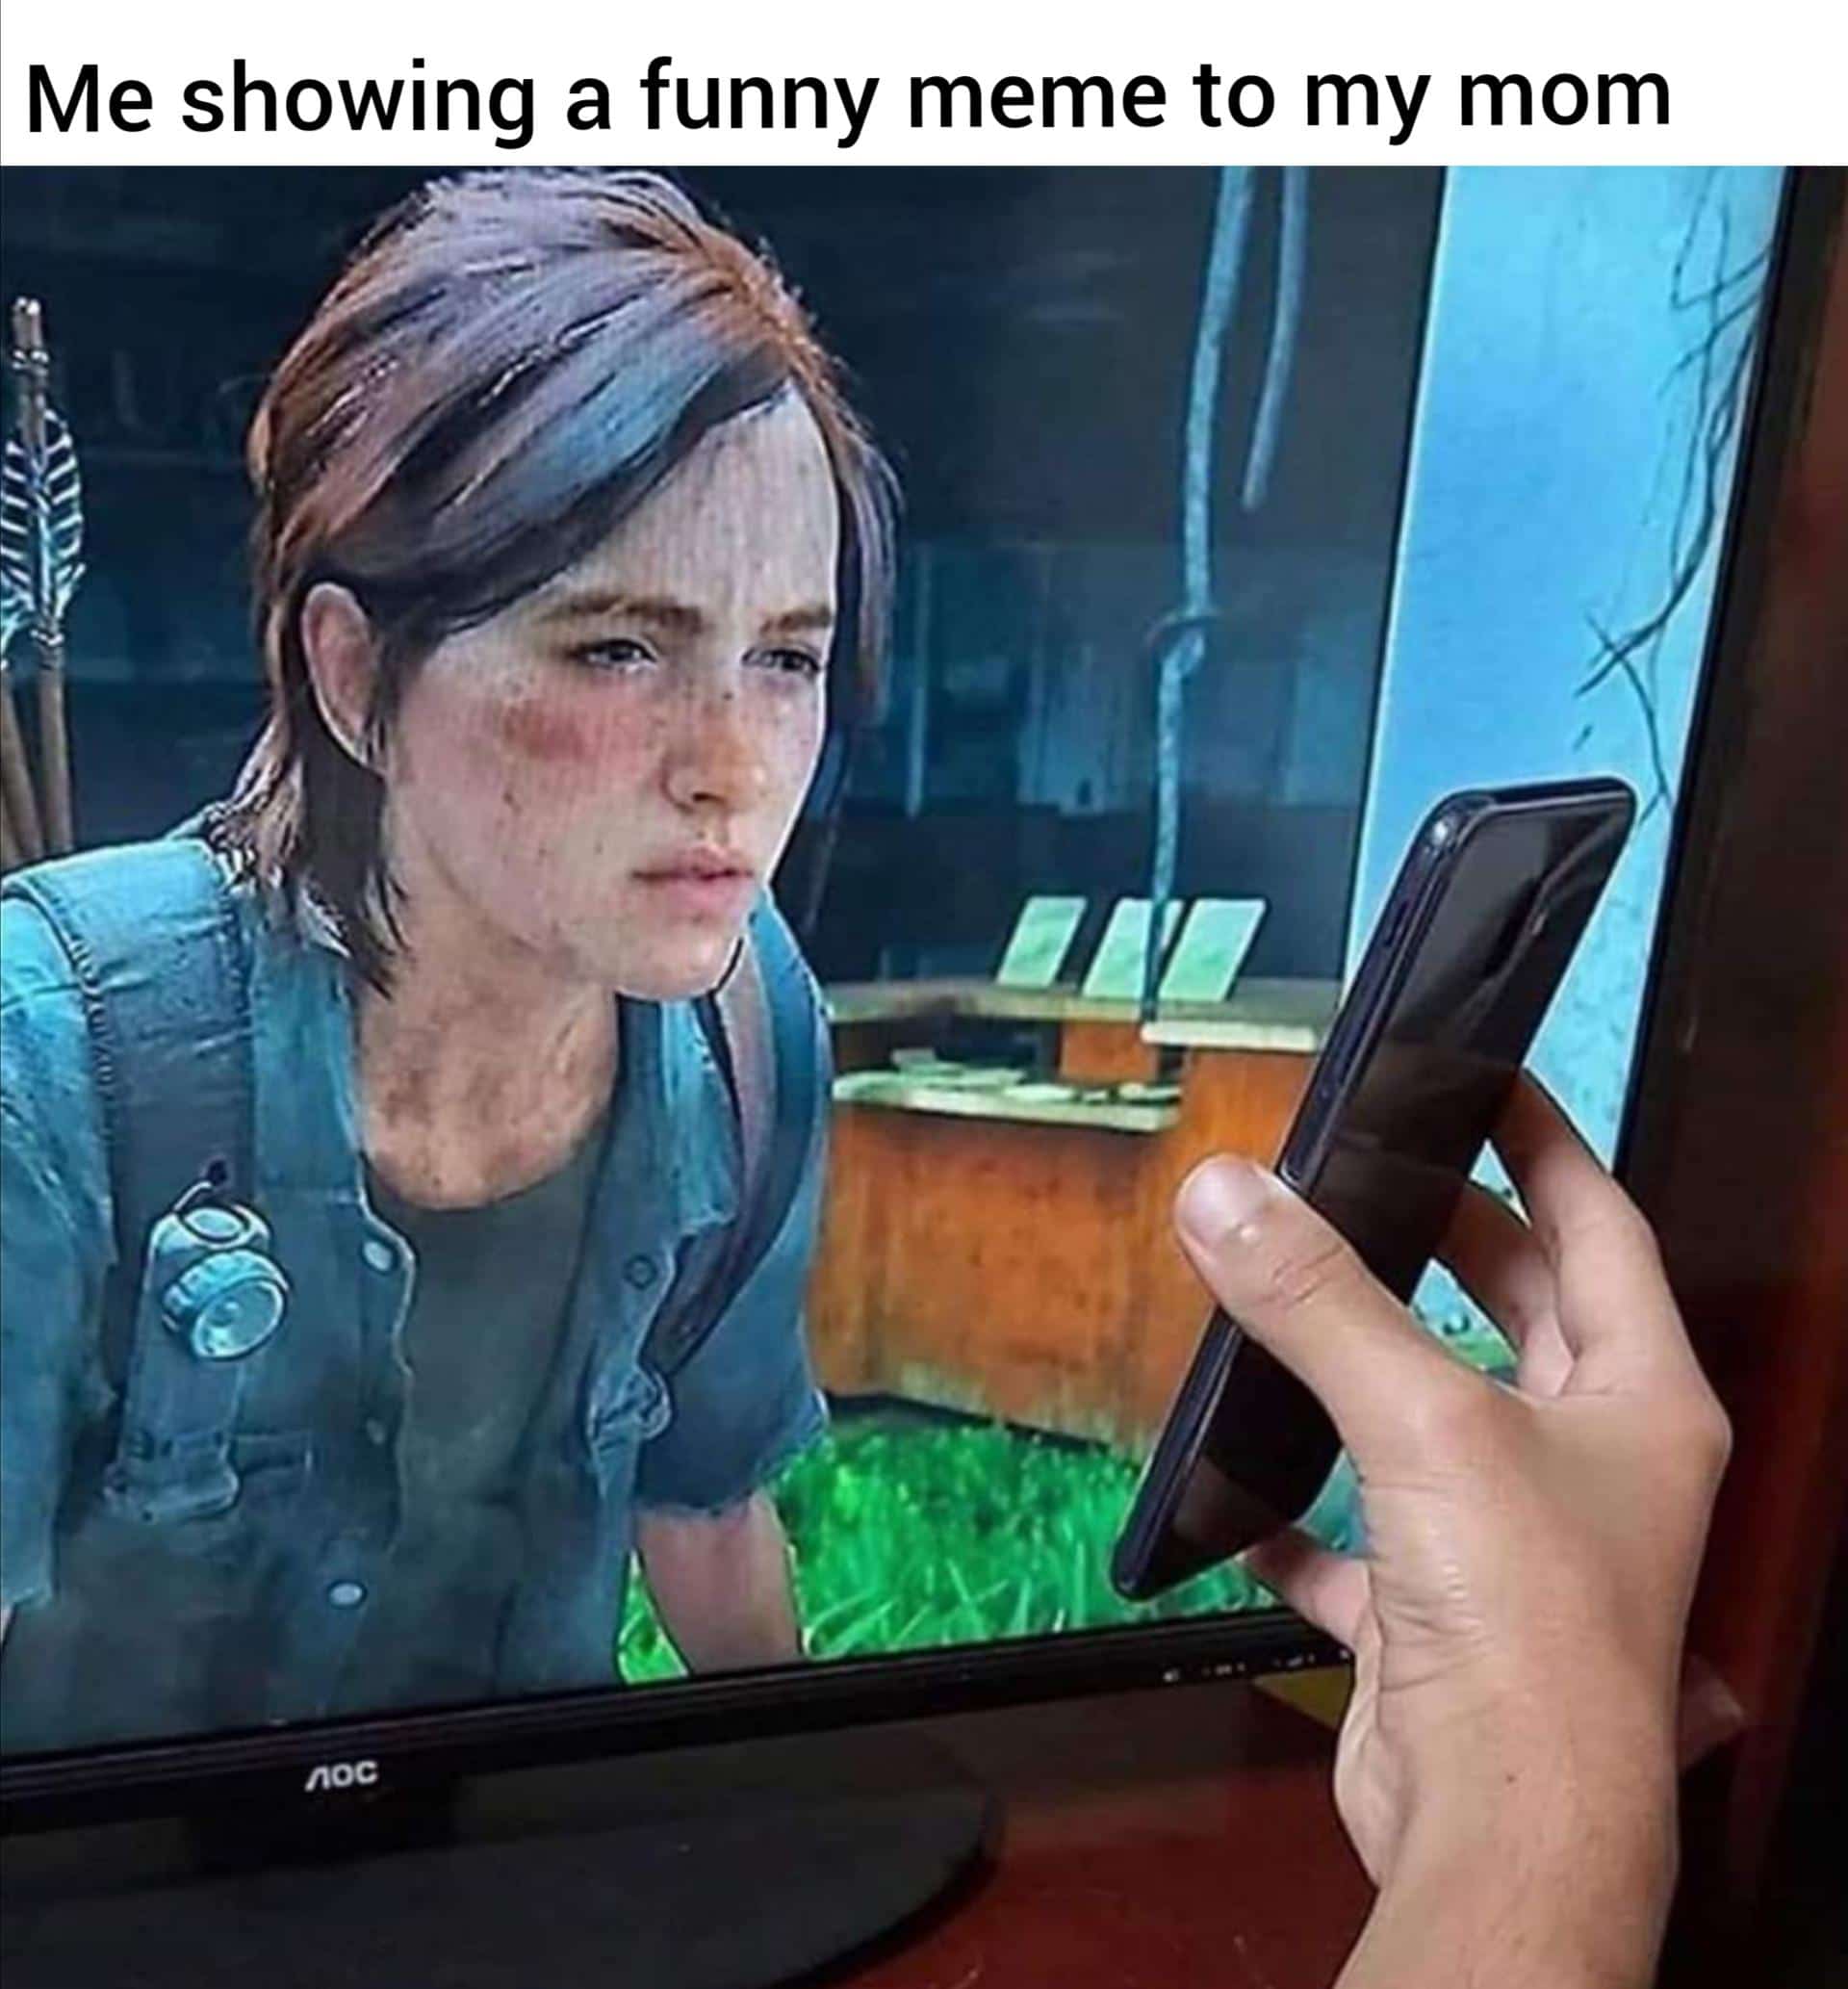 Funny, Ellie, Reddit, WgXcQ, Qw4, Abby other memes Funny, Ellie, Reddit, WgXcQ, Qw4, Abby text: Me showing a funny meme to my mom 